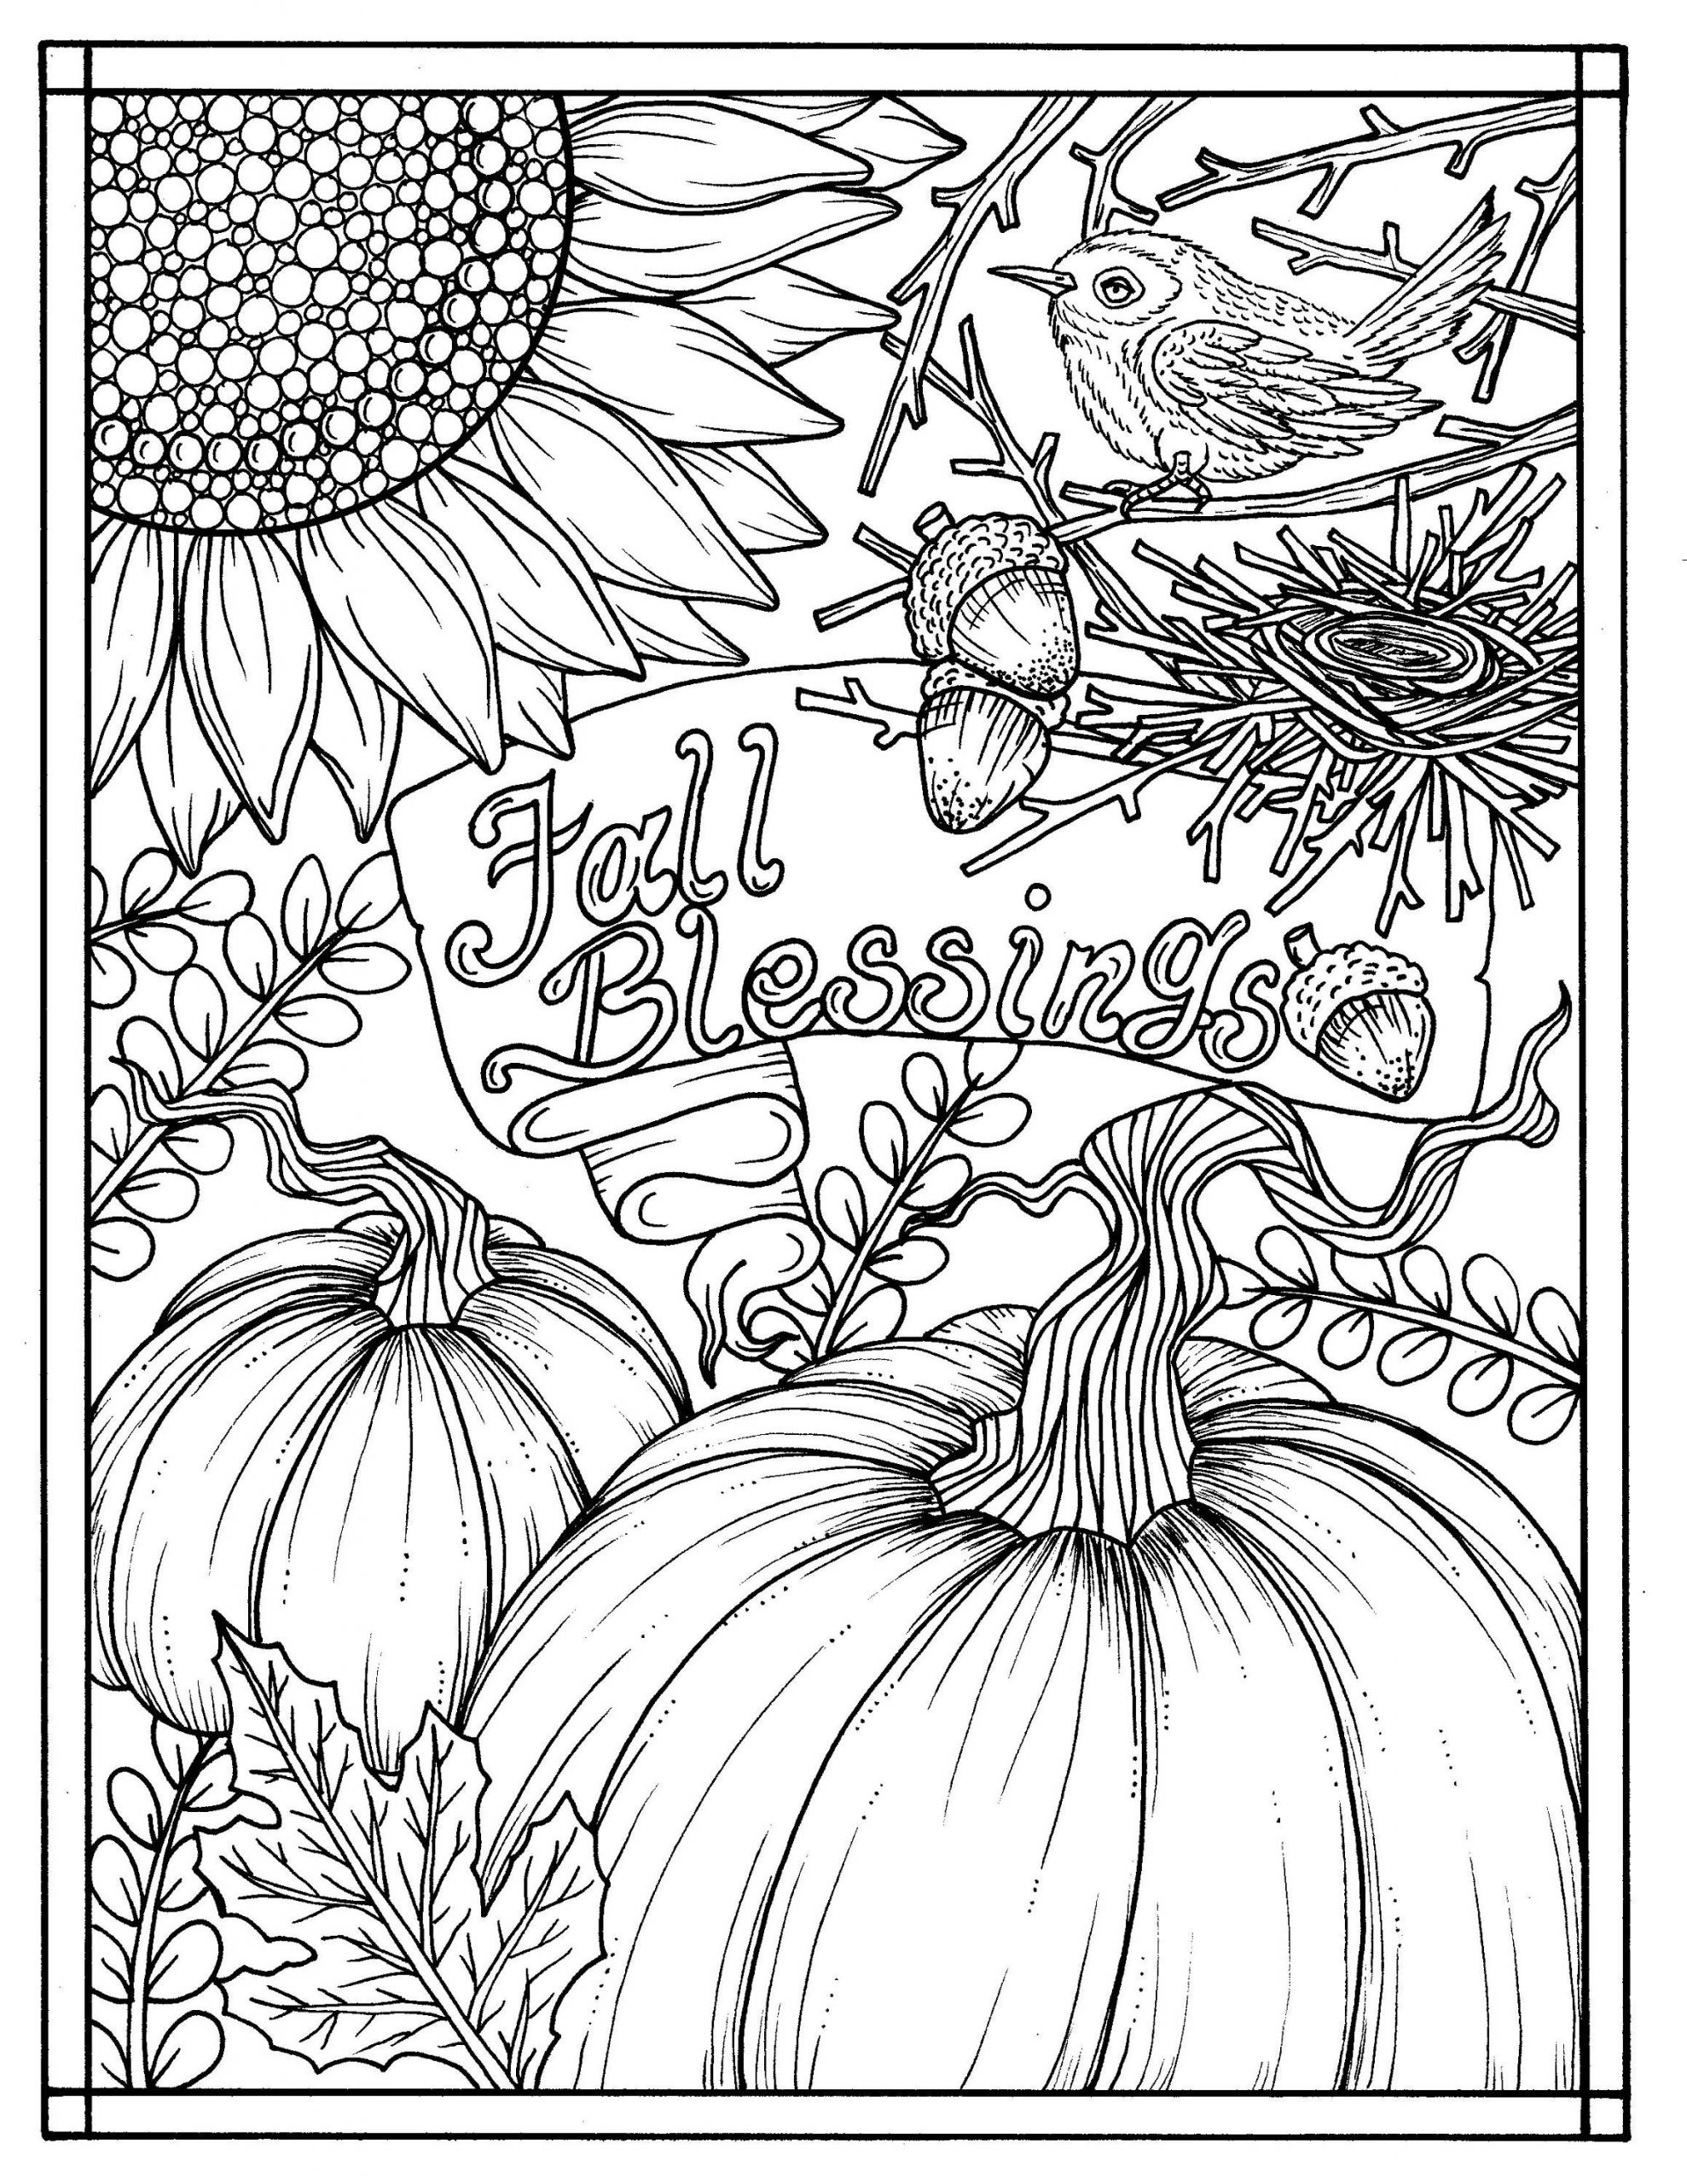 Autumn Coloring Pages For Adults
 Download Fall Blessings Instant digital Coloring page